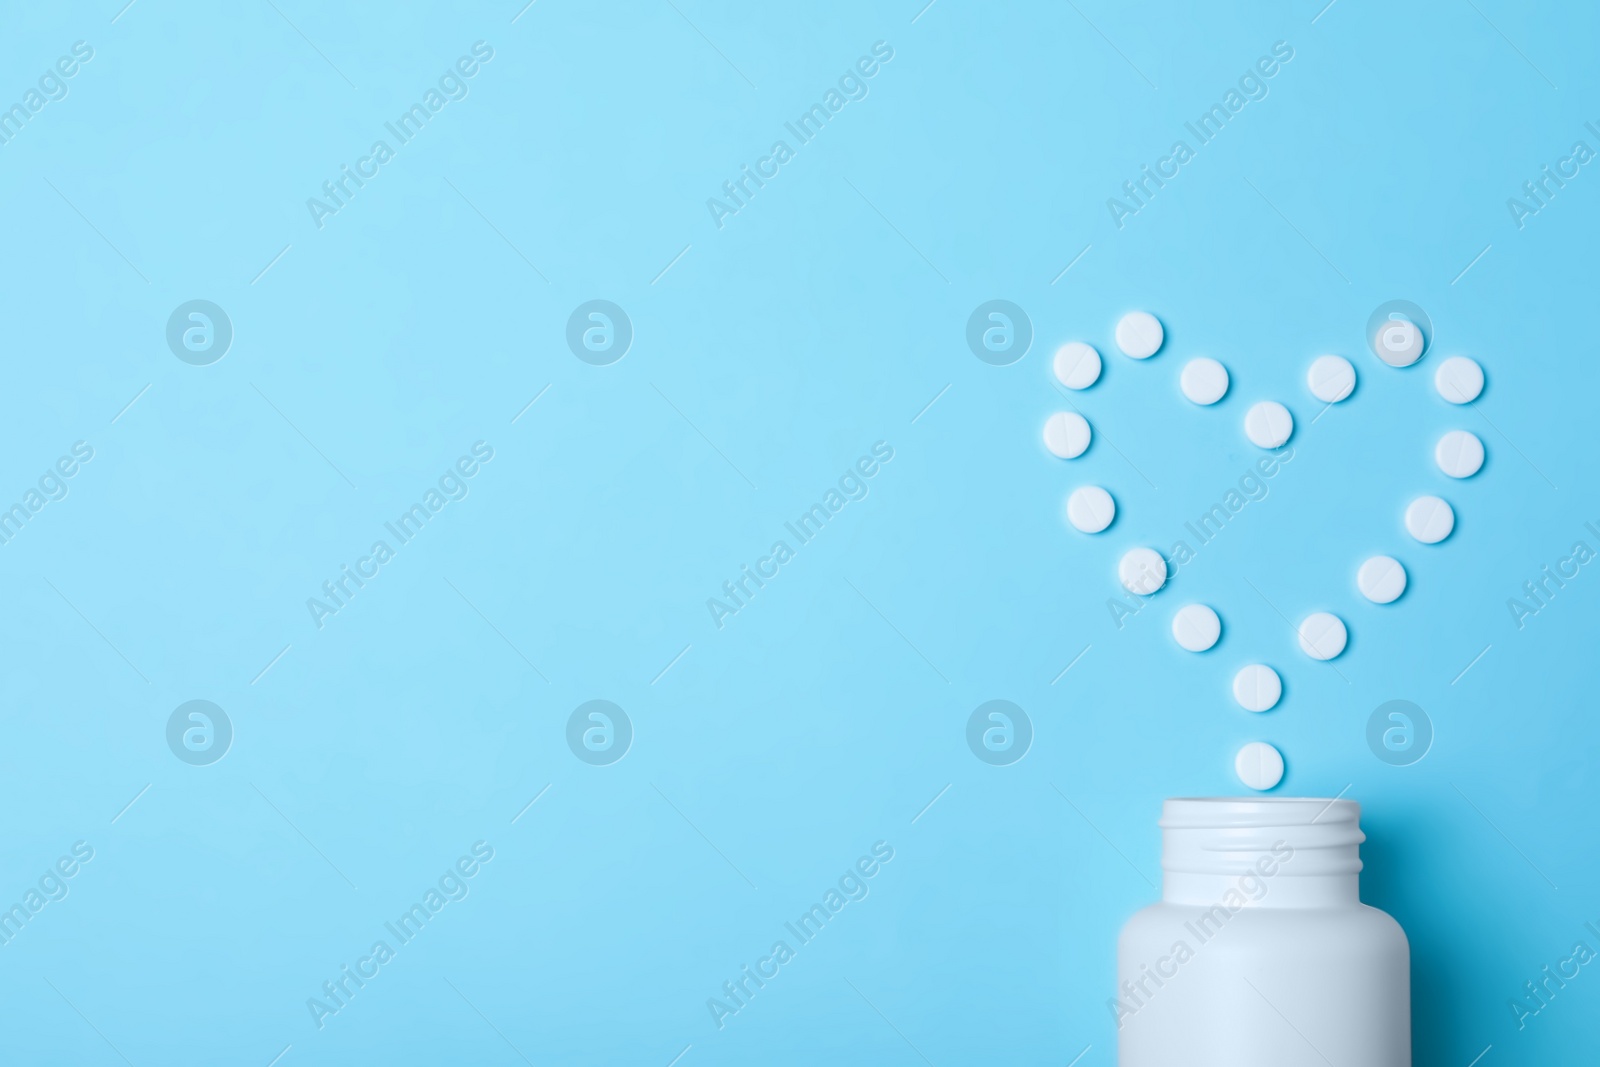 Photo of Heart made of pills and container on color background, top view with space for text. Cardiology concept